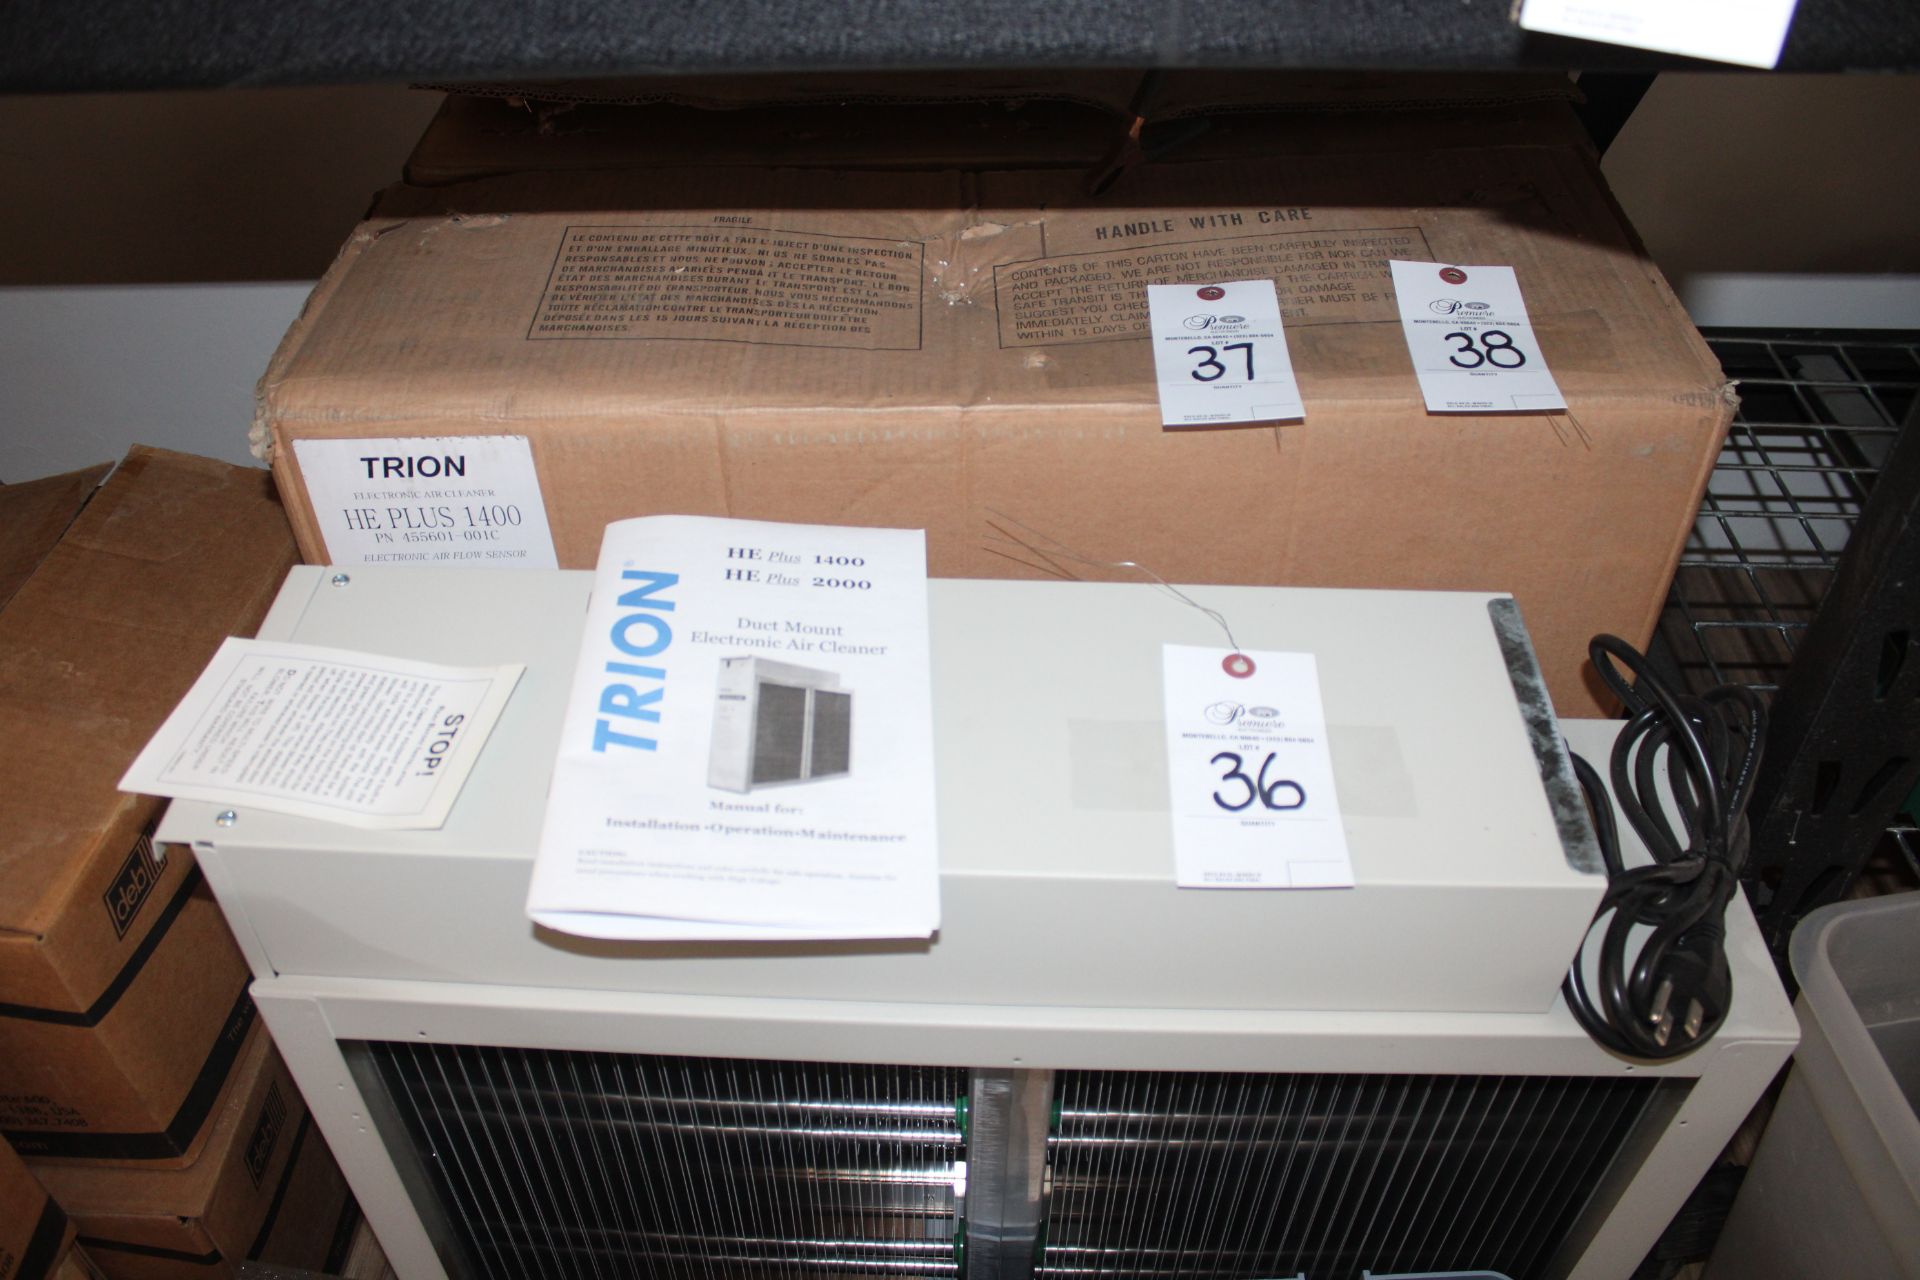 TRION HE PLUS 1400 ELECTRONIC AIR CLEAN **NEW**